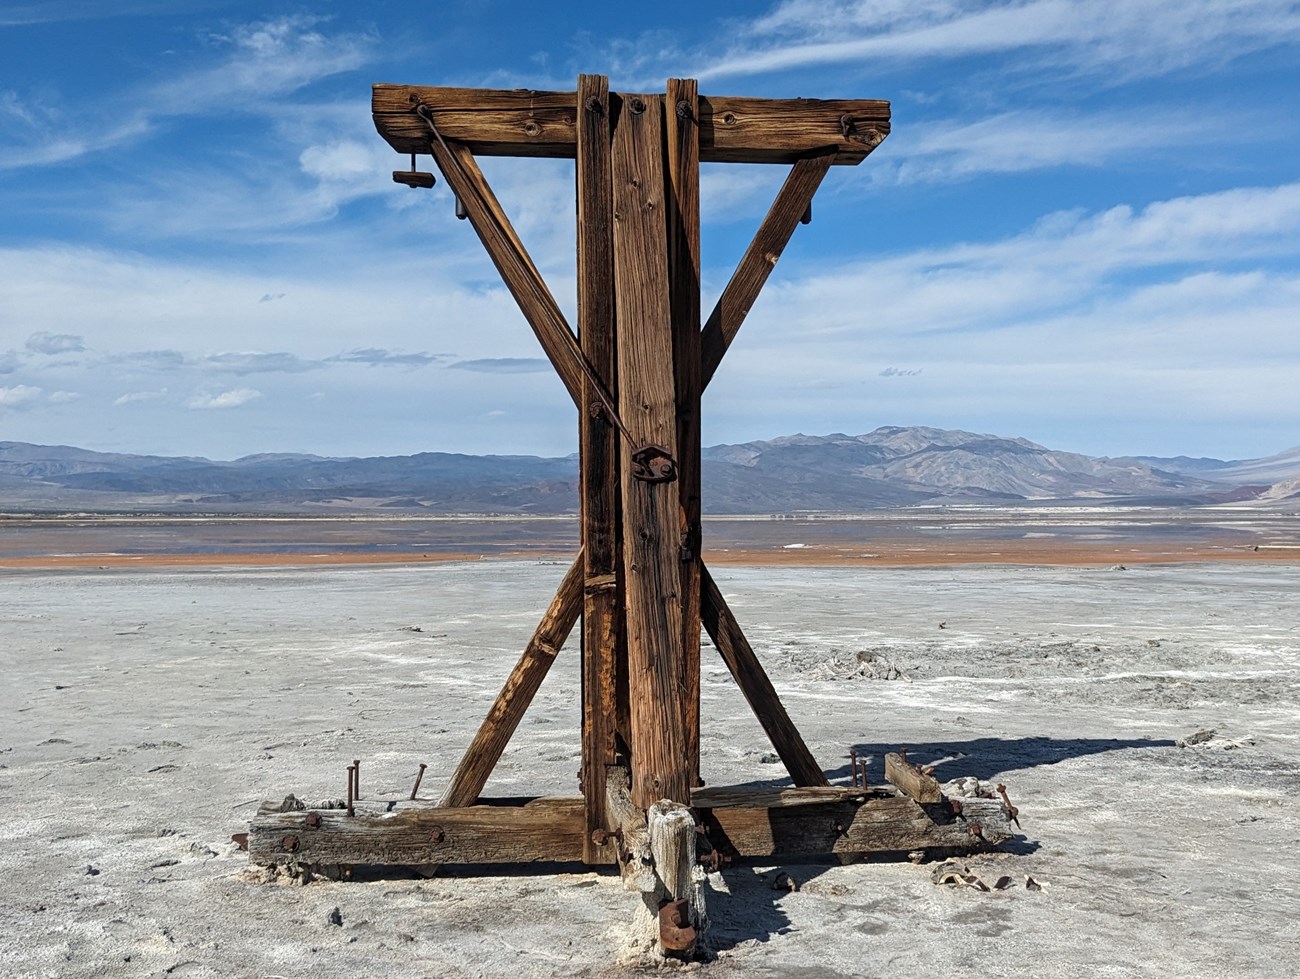 Wooden structure stands upright on flat white ground. A shallow lake and desert mountains are in the background.